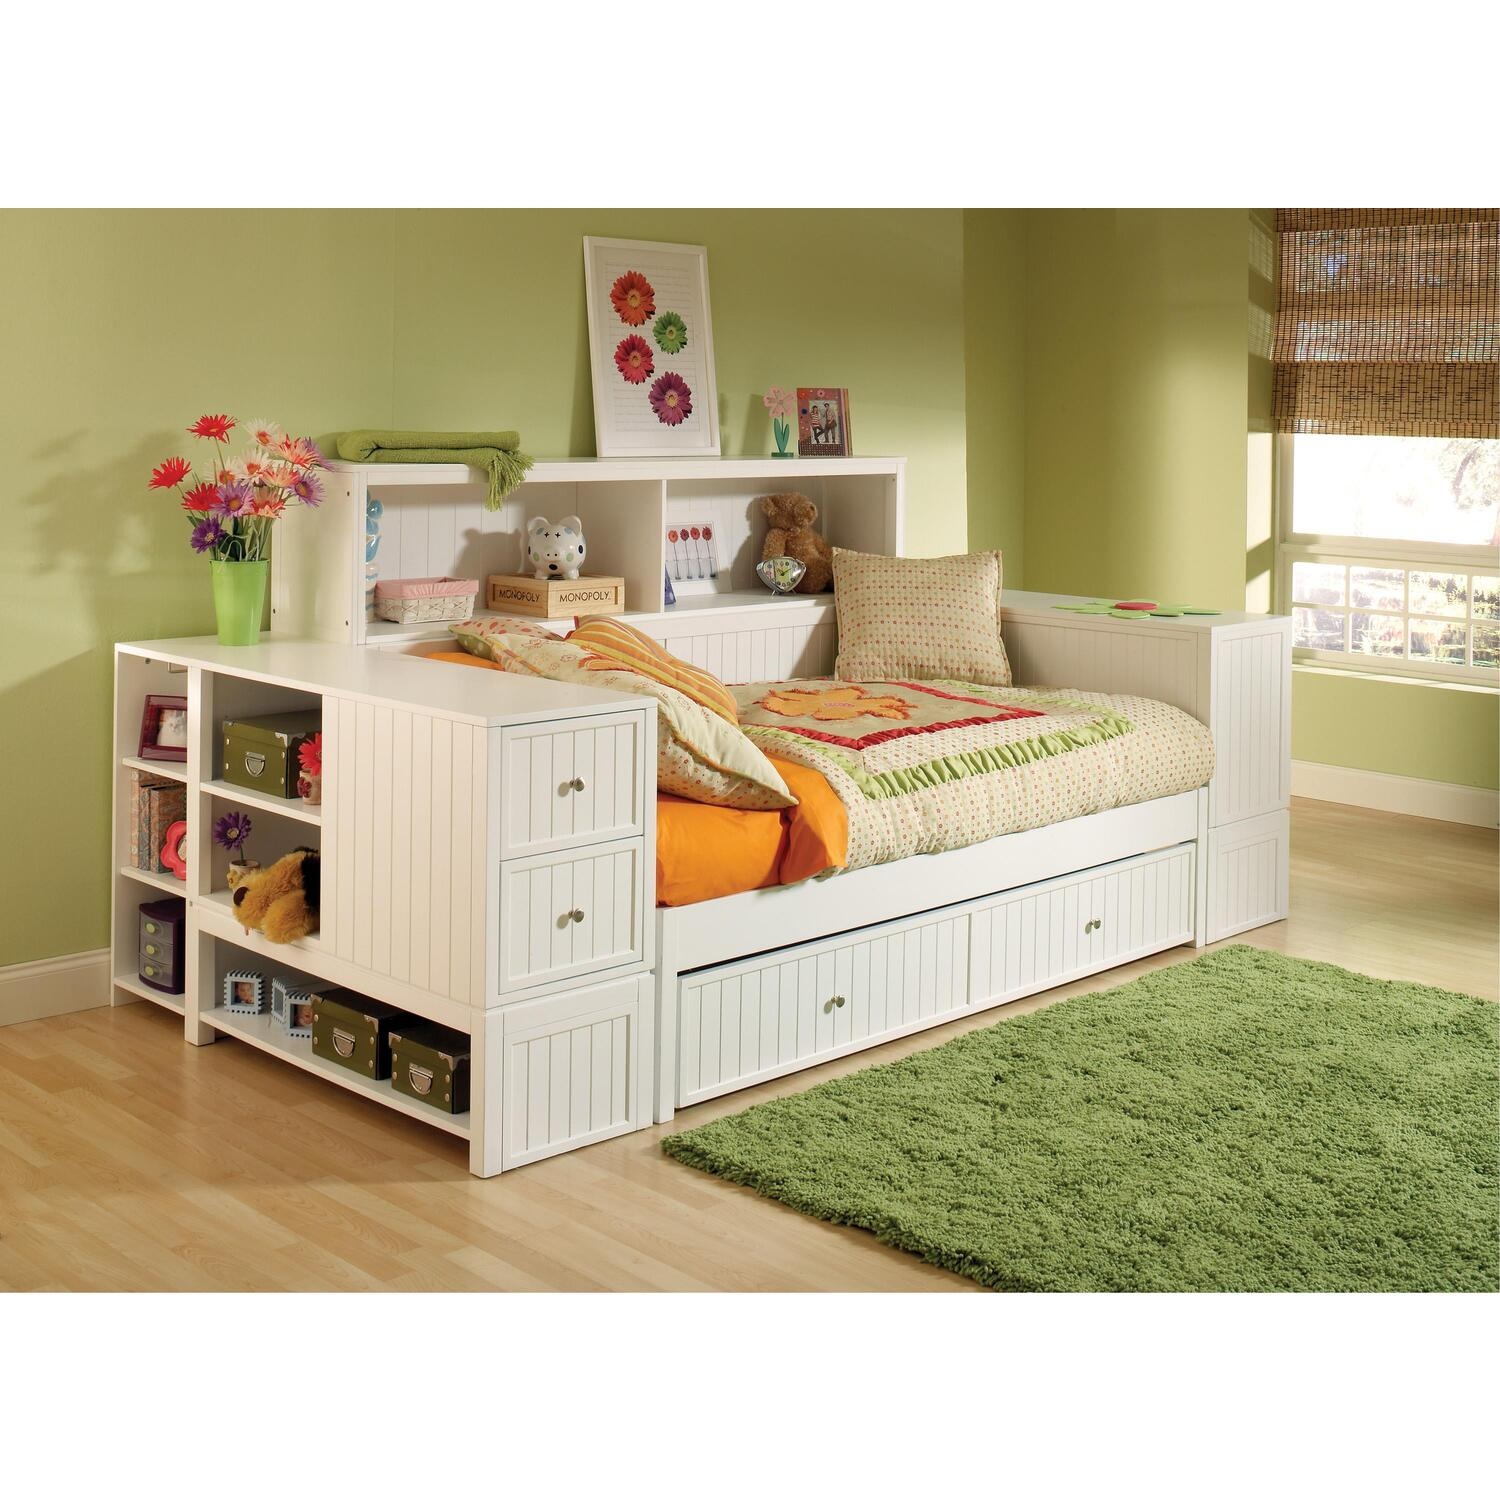 Cody bookcase daybed with trundle storage drawer hillsdale furniture